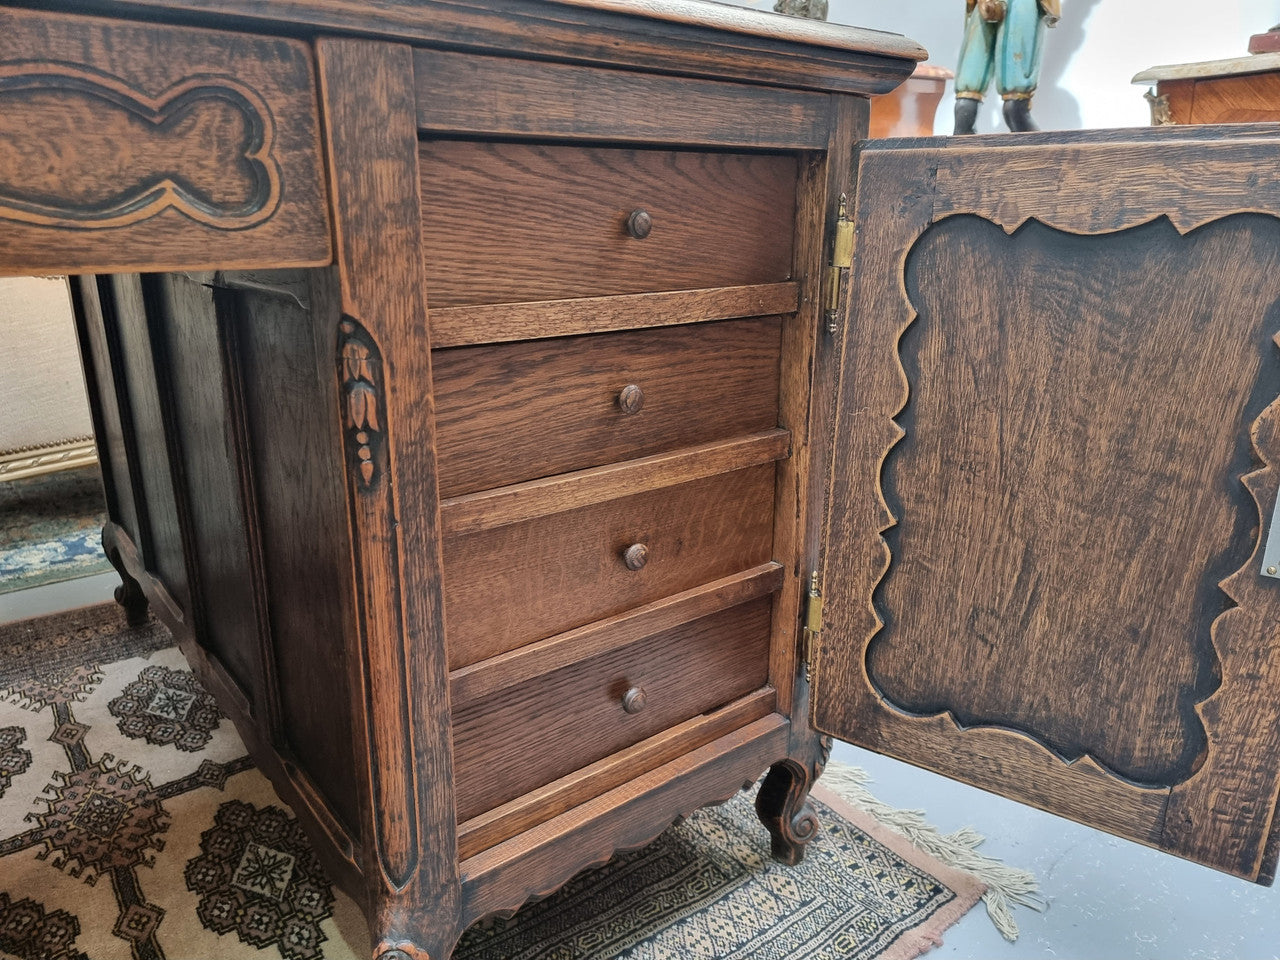 Fabulous Louis XV style French Oak beautifully carved full partners desk. Both sides have a functioning drawer in the middle and two cupboards either side. On both sides one cupboard door opens up to four smaller internal drawers. Plenty of storage space and a large top surface to work on. It is in good original detailed condition.